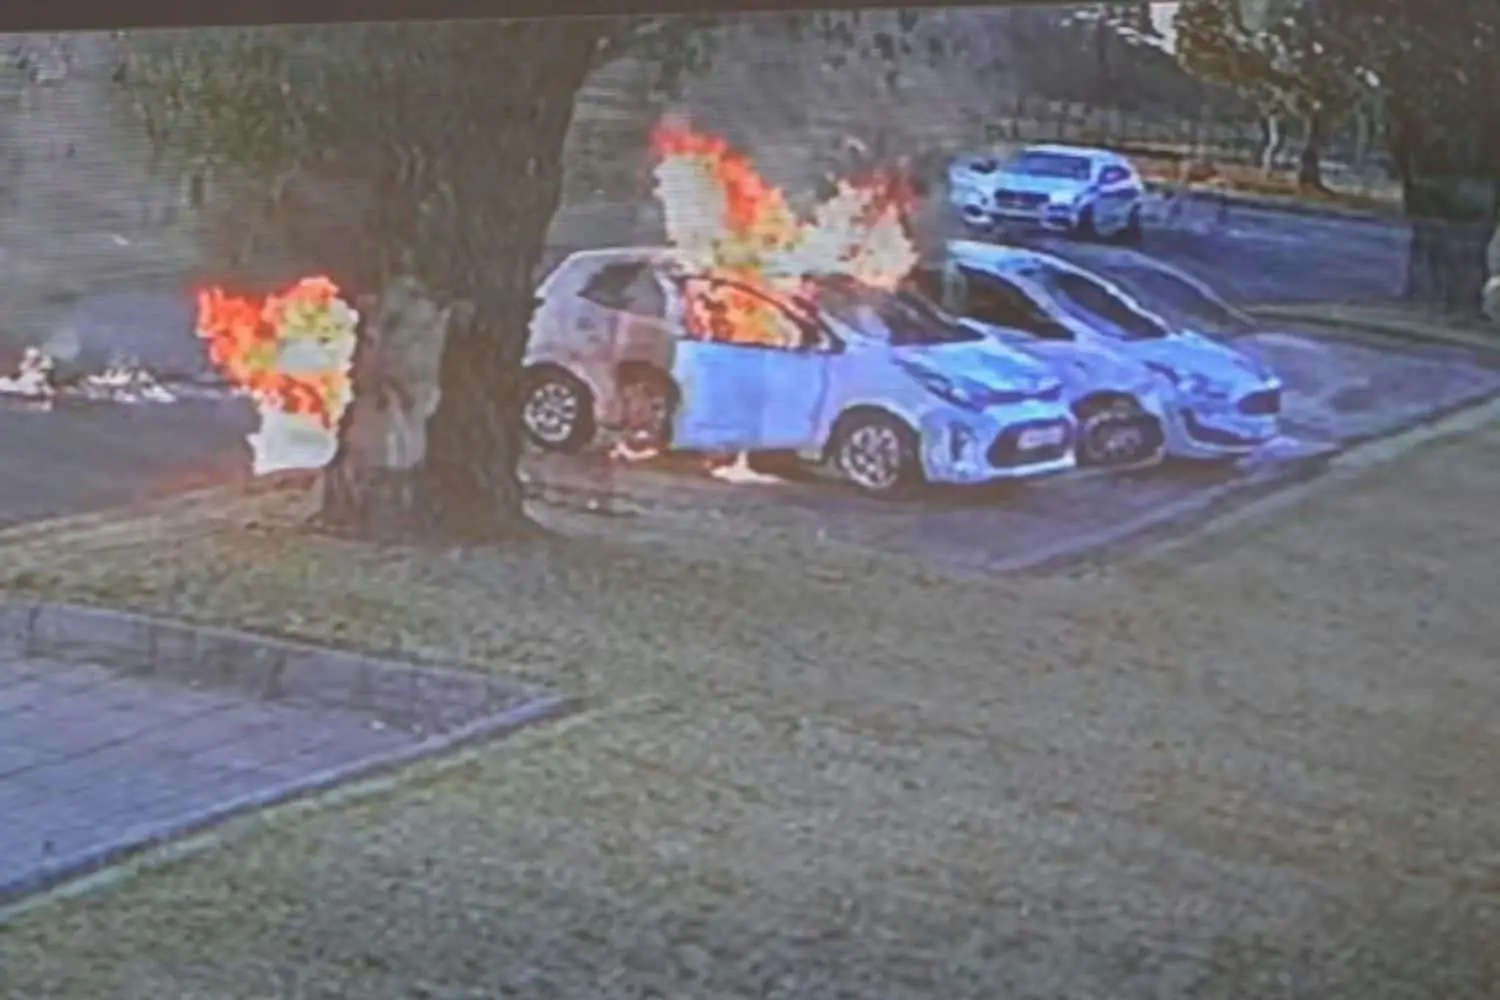 Mother and car set alight outside pre-school